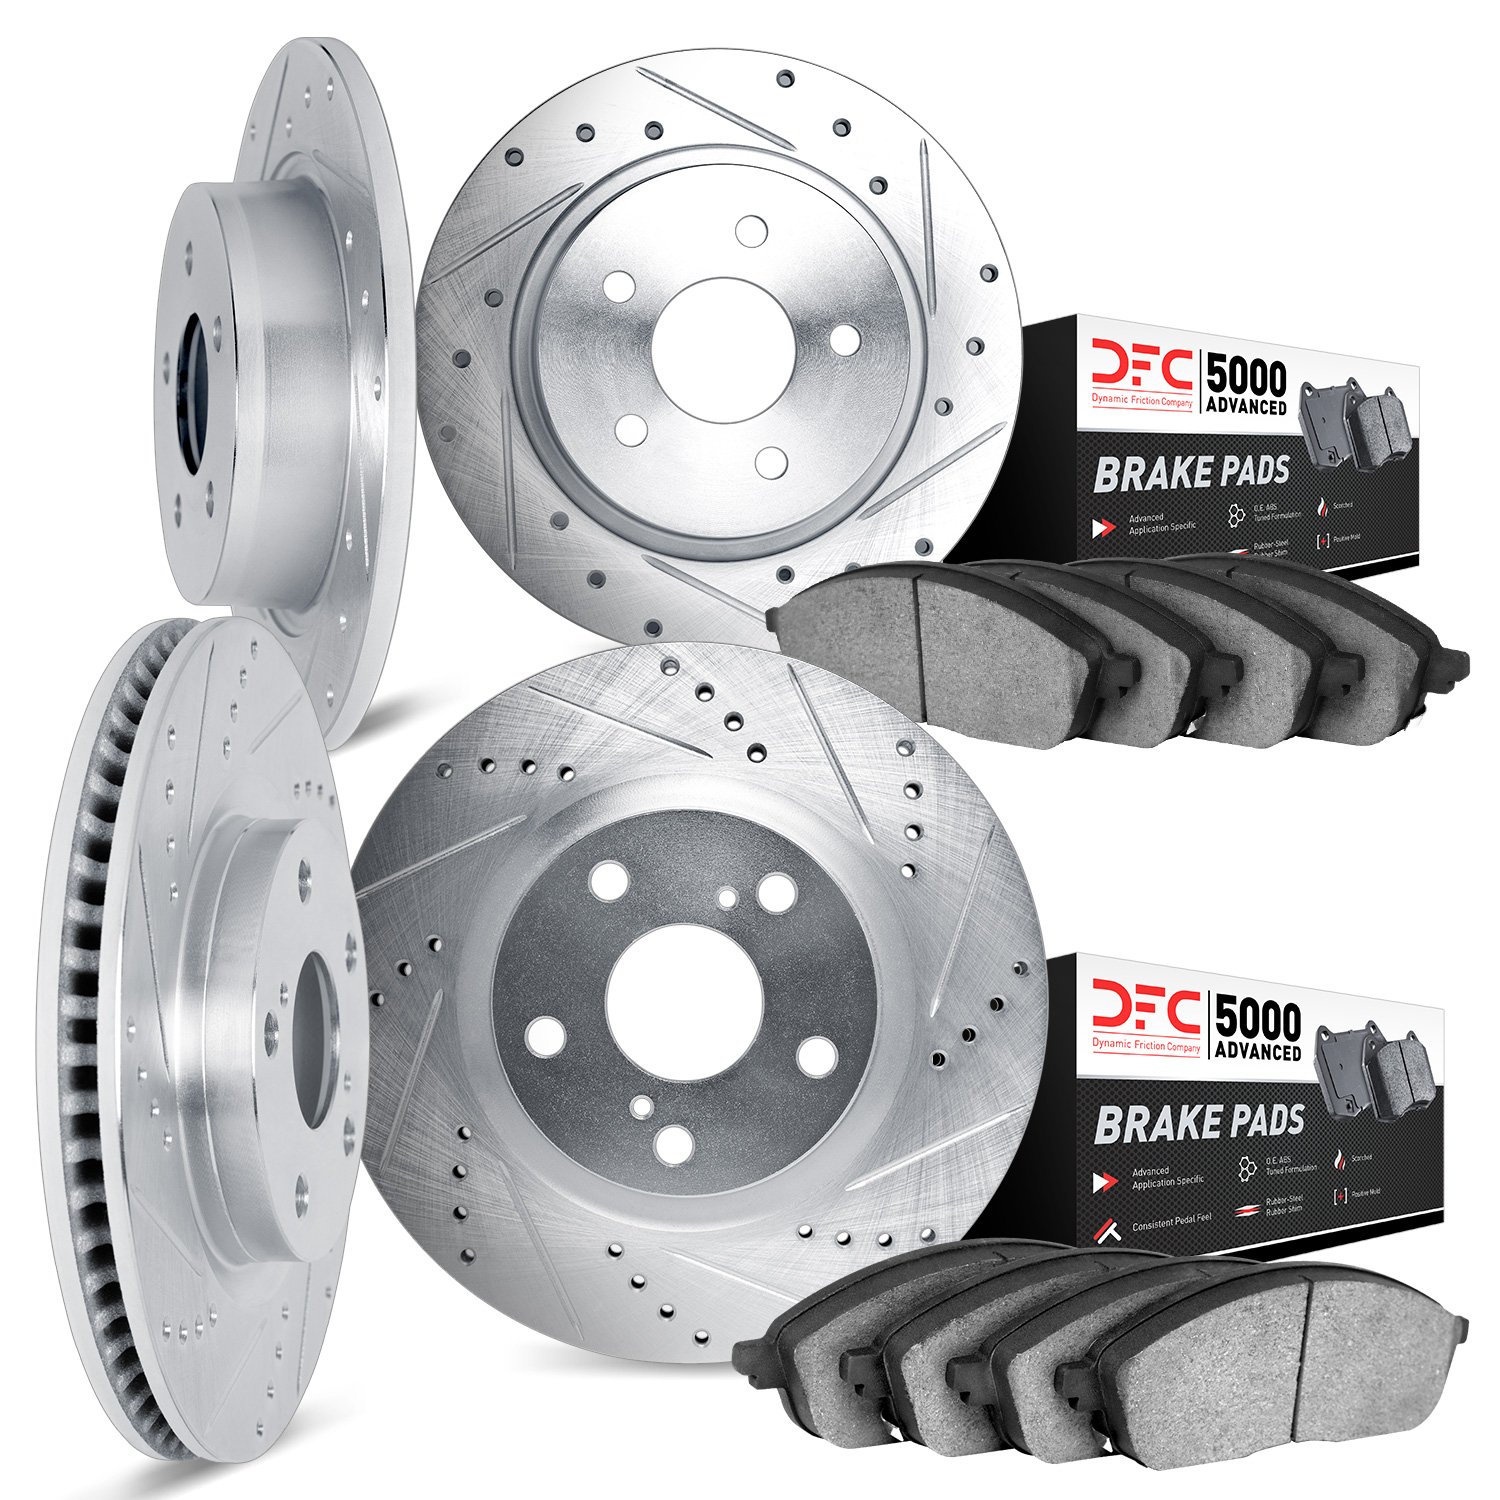 7504-54307 Drilled/Slotted Brake Rotors w/5000 Advanced Brake Pads Kit [Silver], 2015-2020 Ford/Lincoln/Mercury/Mazda, Position: